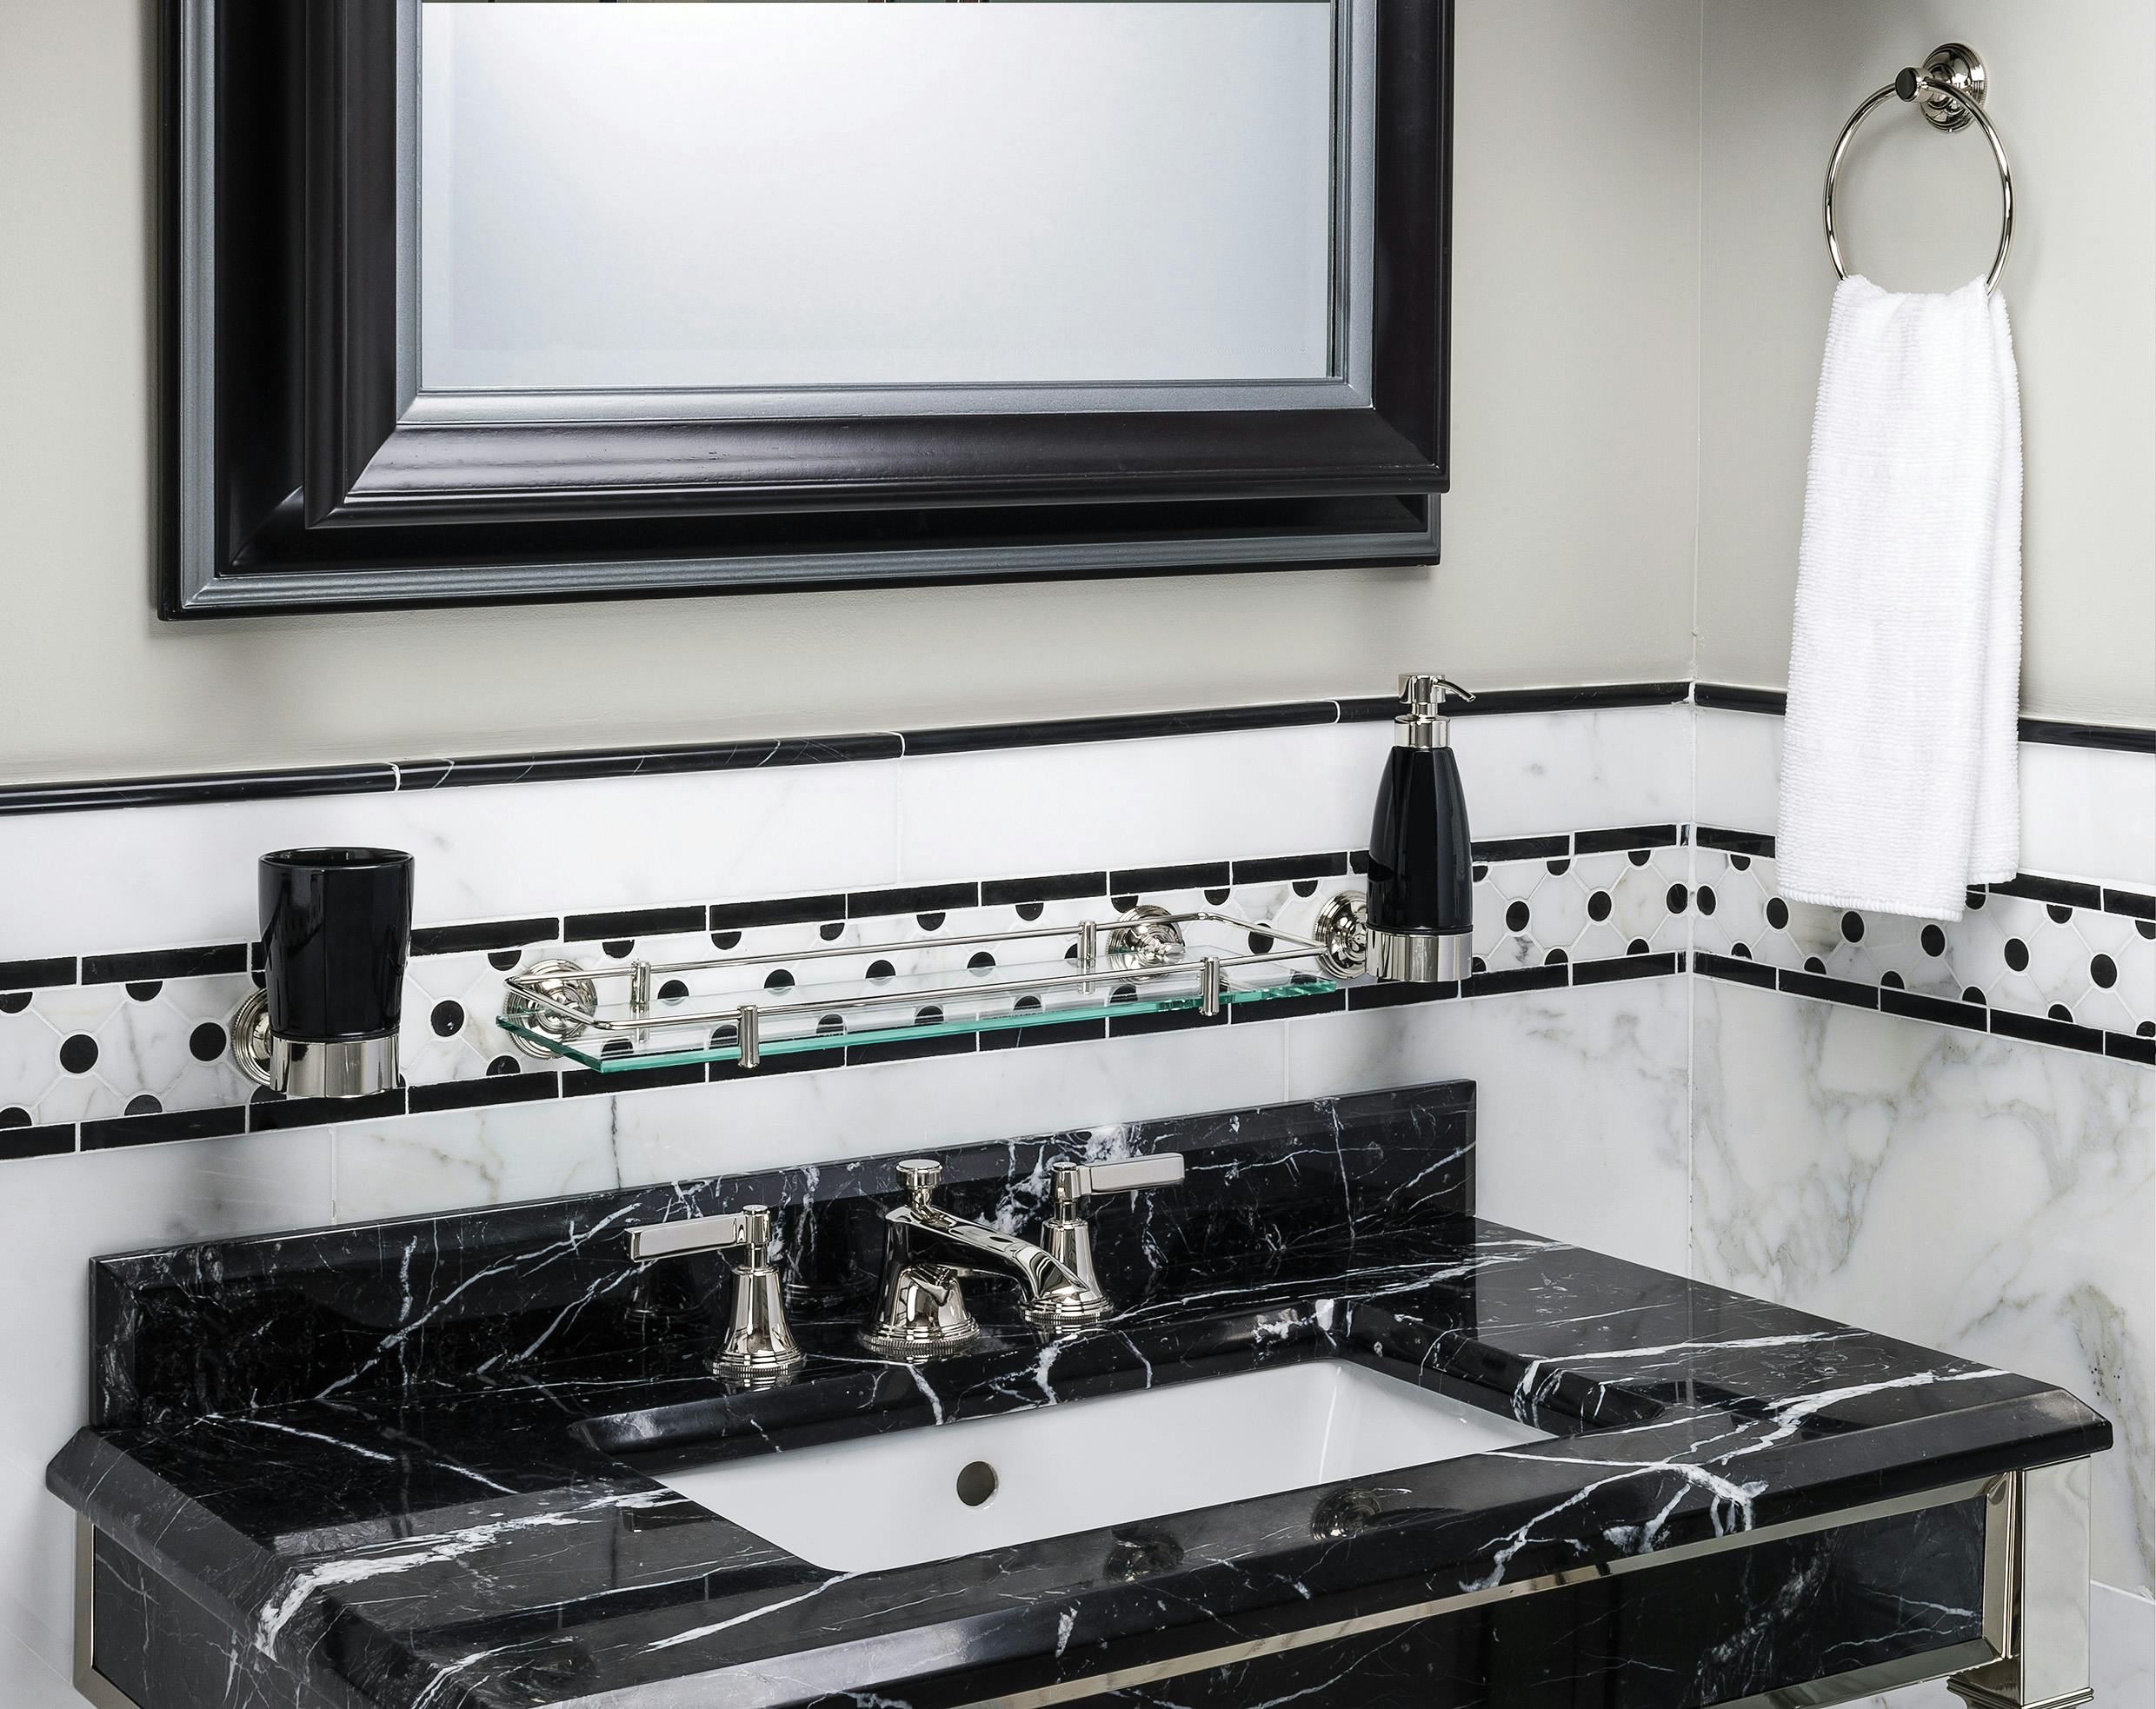 Luxury Art Deco taps mounted on a black marble basin